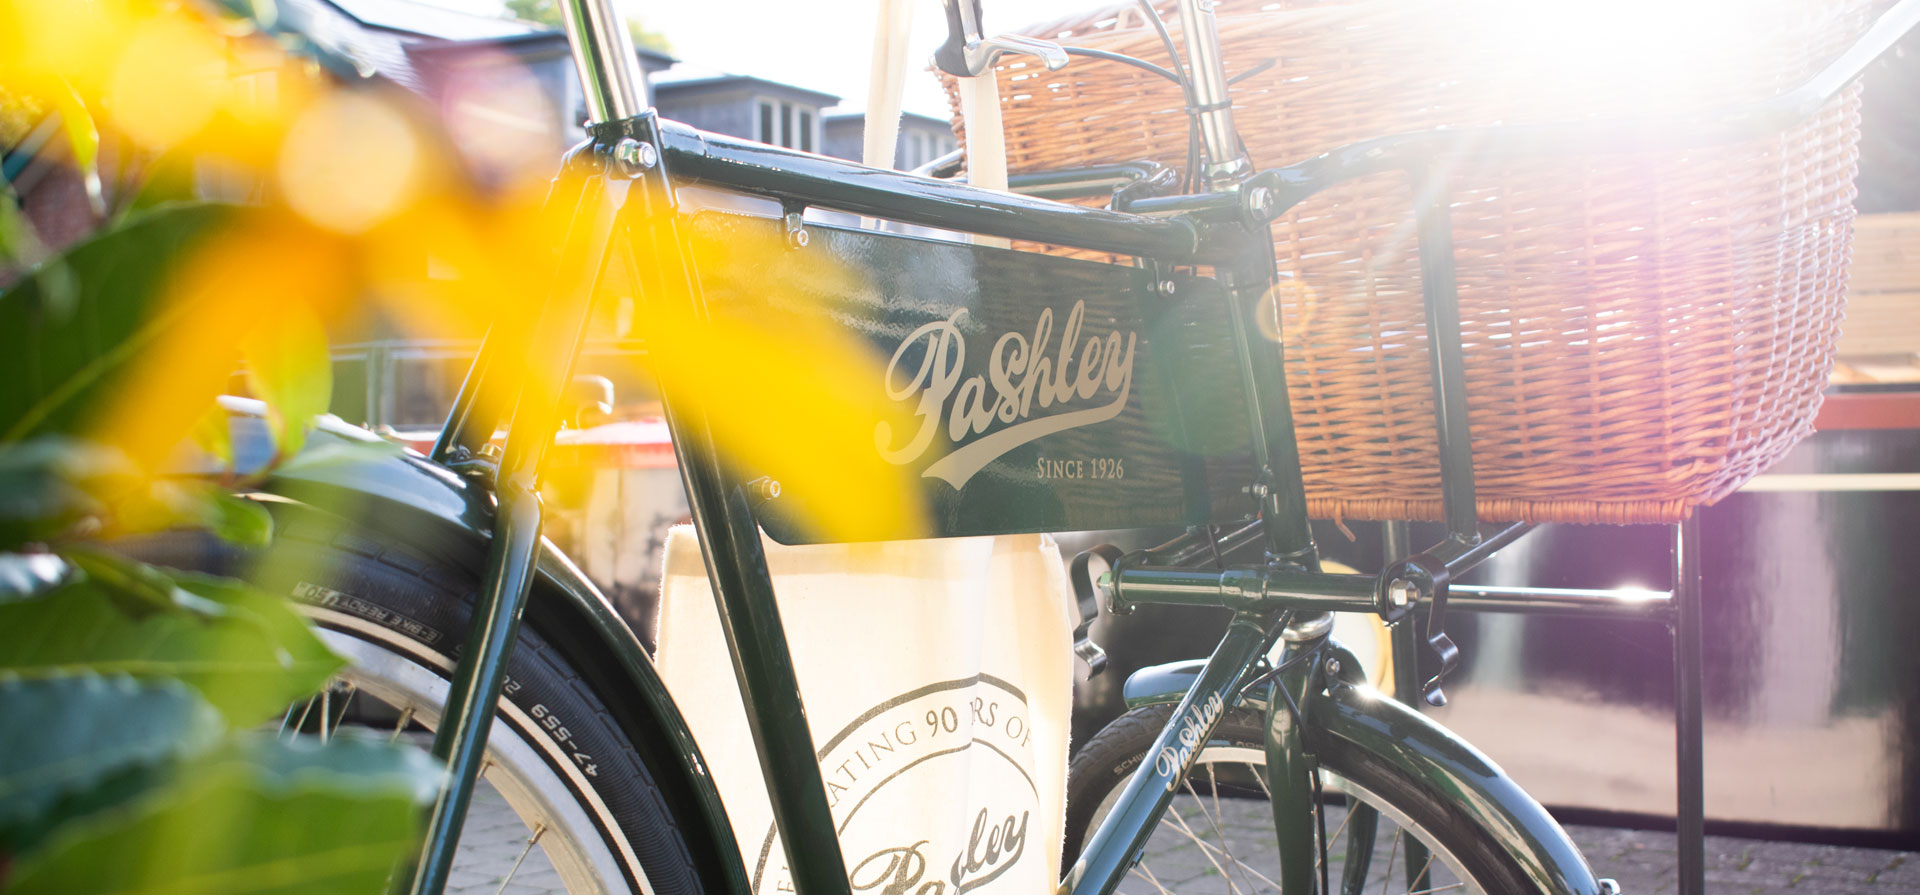 A close-up of the Pashley butchers style bike, showing it's advertising nameplate attached to it's frame. It also has a large front cargo basket.